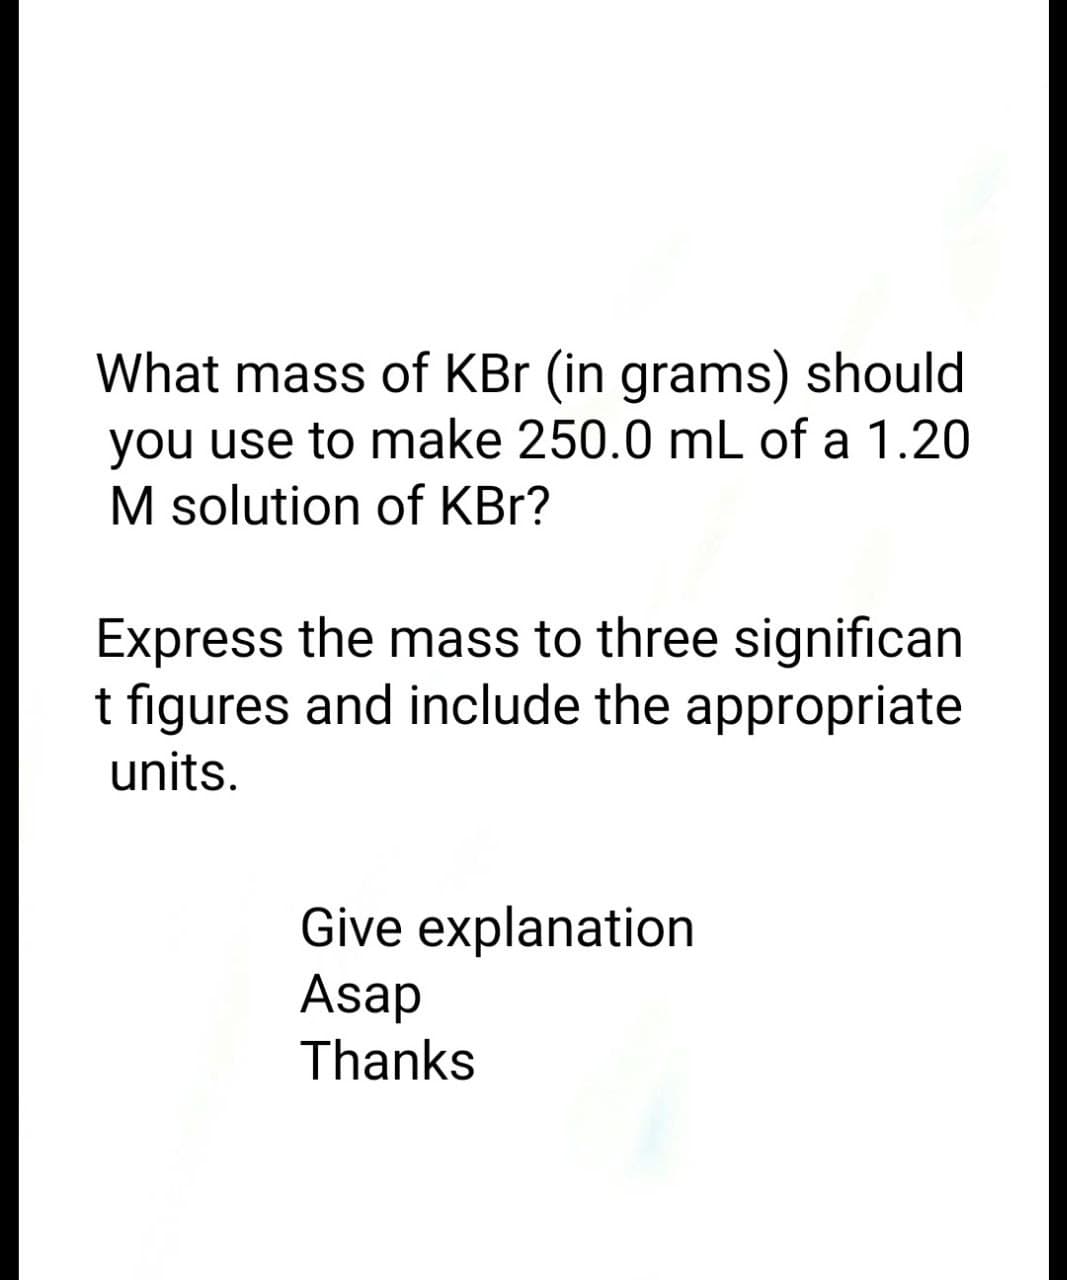 What mass of KBr (in grams) should
you use to make 250.0 mL of a 1.20
M solution of KBr?
Express the mass to three significan
t figures and include the appropriate
units.
Give explanation
Asap
Thanks